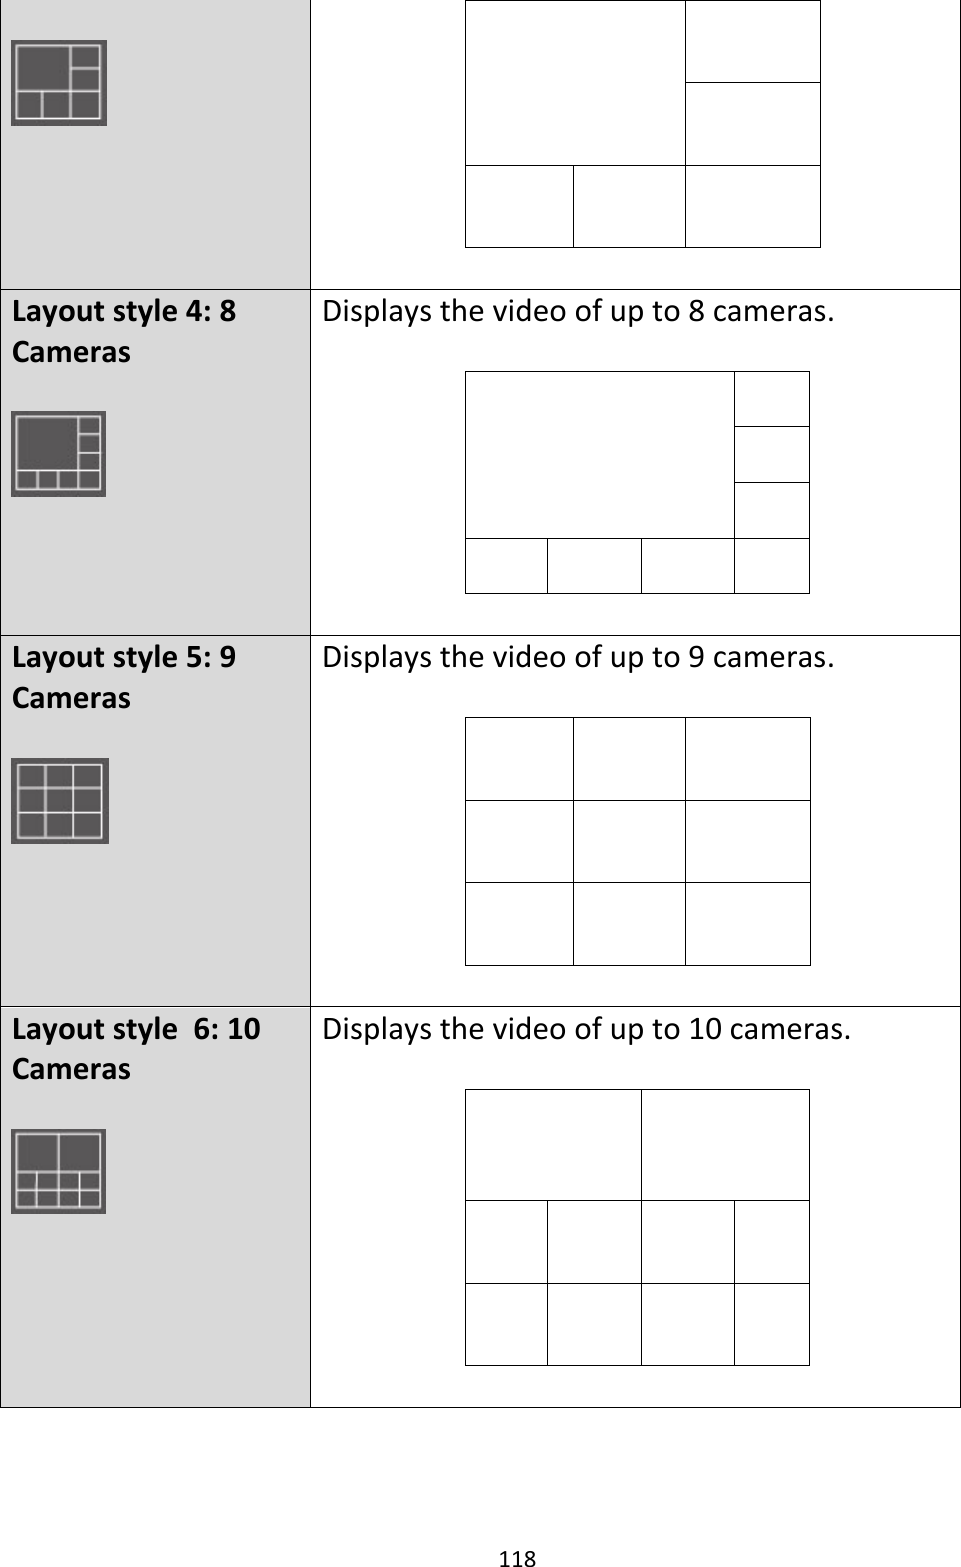 118                Layout style 4: 8 Cameras   Displays the video of up to 8 cameras.              Layout style 5: 9 Cameras   Displays the video of up to 9 cameras.                 Layout style  6: 10 Cameras   Displays the video of up to 10 cameras.                    